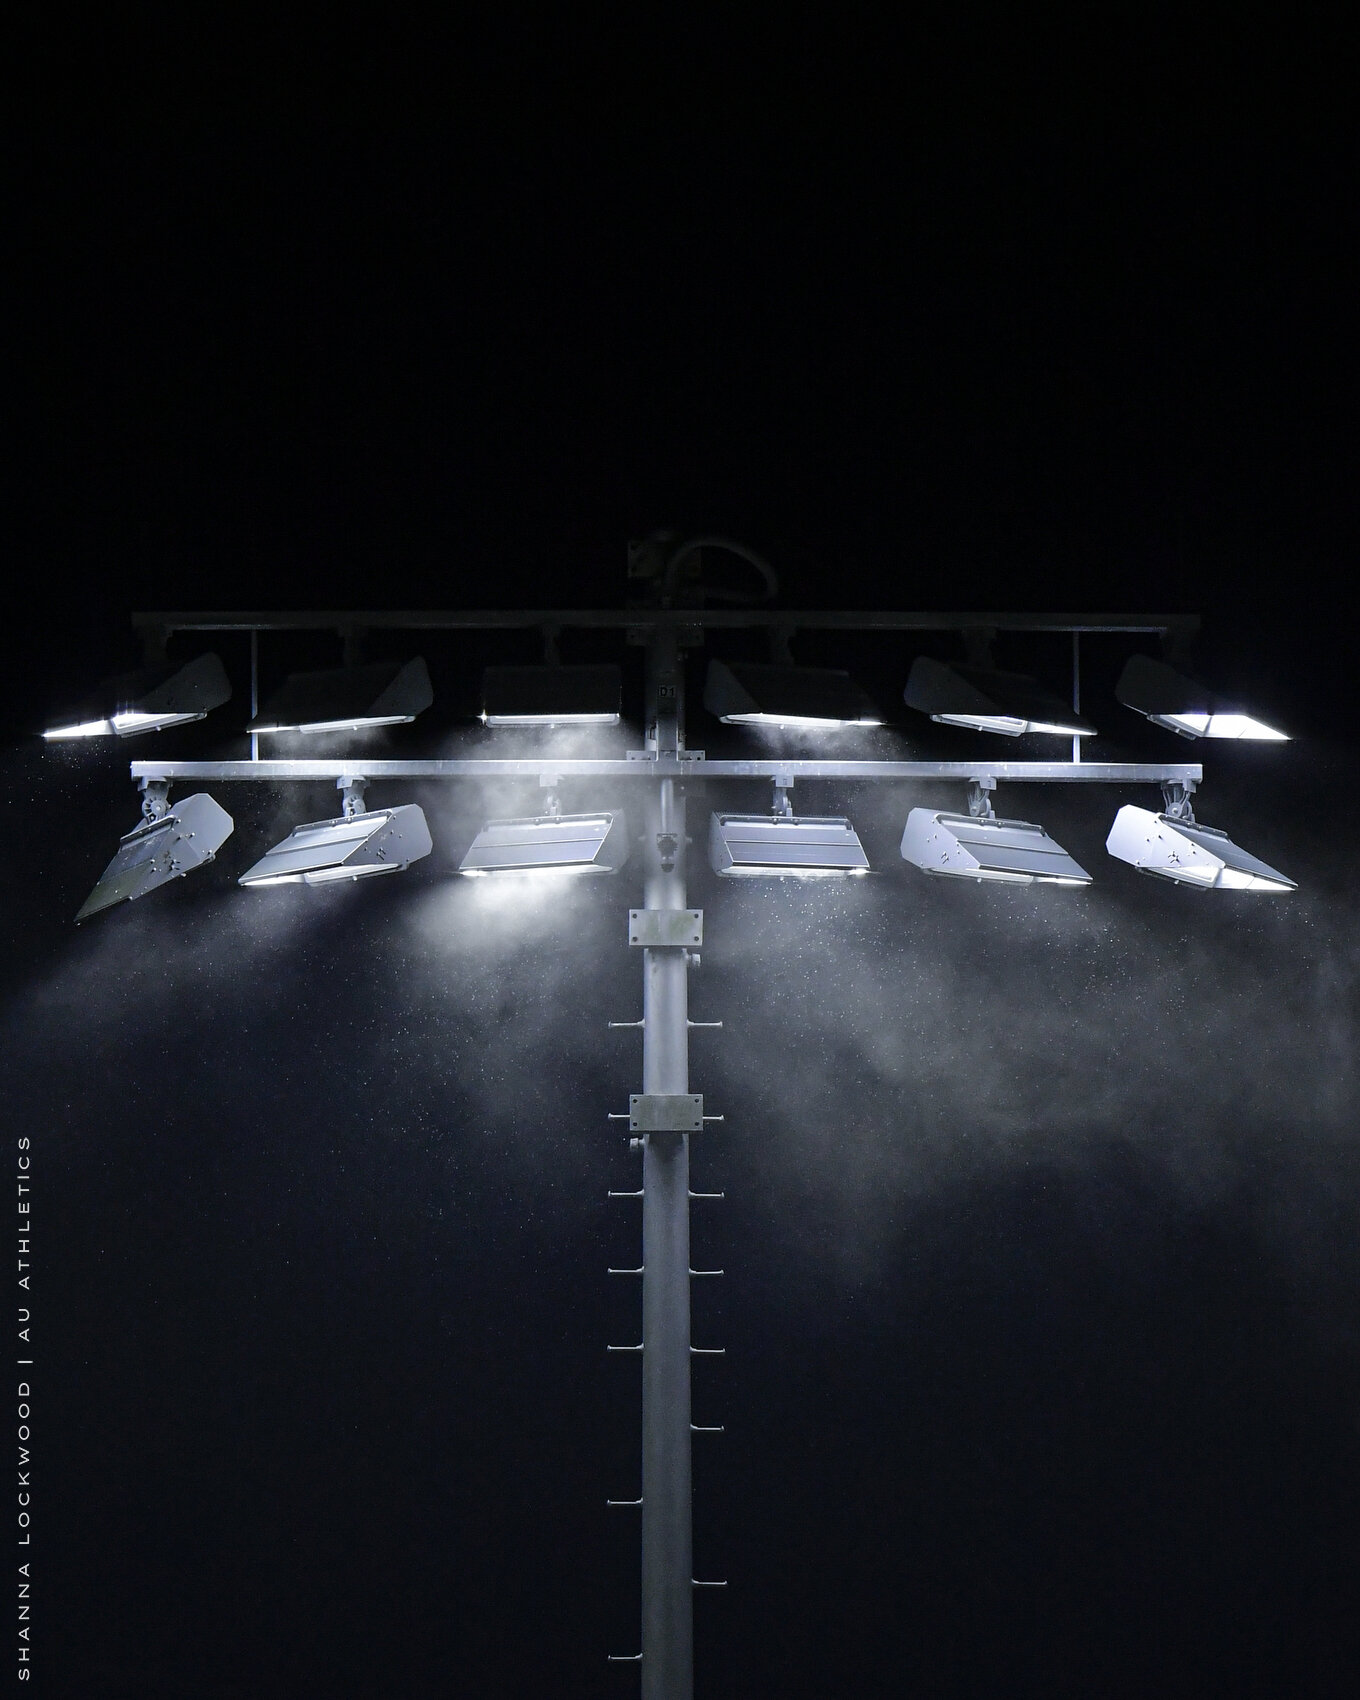  Apr 9, 2021; Auburn, AL, USA; View of haze in the stadium lights during the game between Auburn and Mississippi State at Plainsman Park. Mandatory Credit: Shanna Lockwood/AU Athletics 